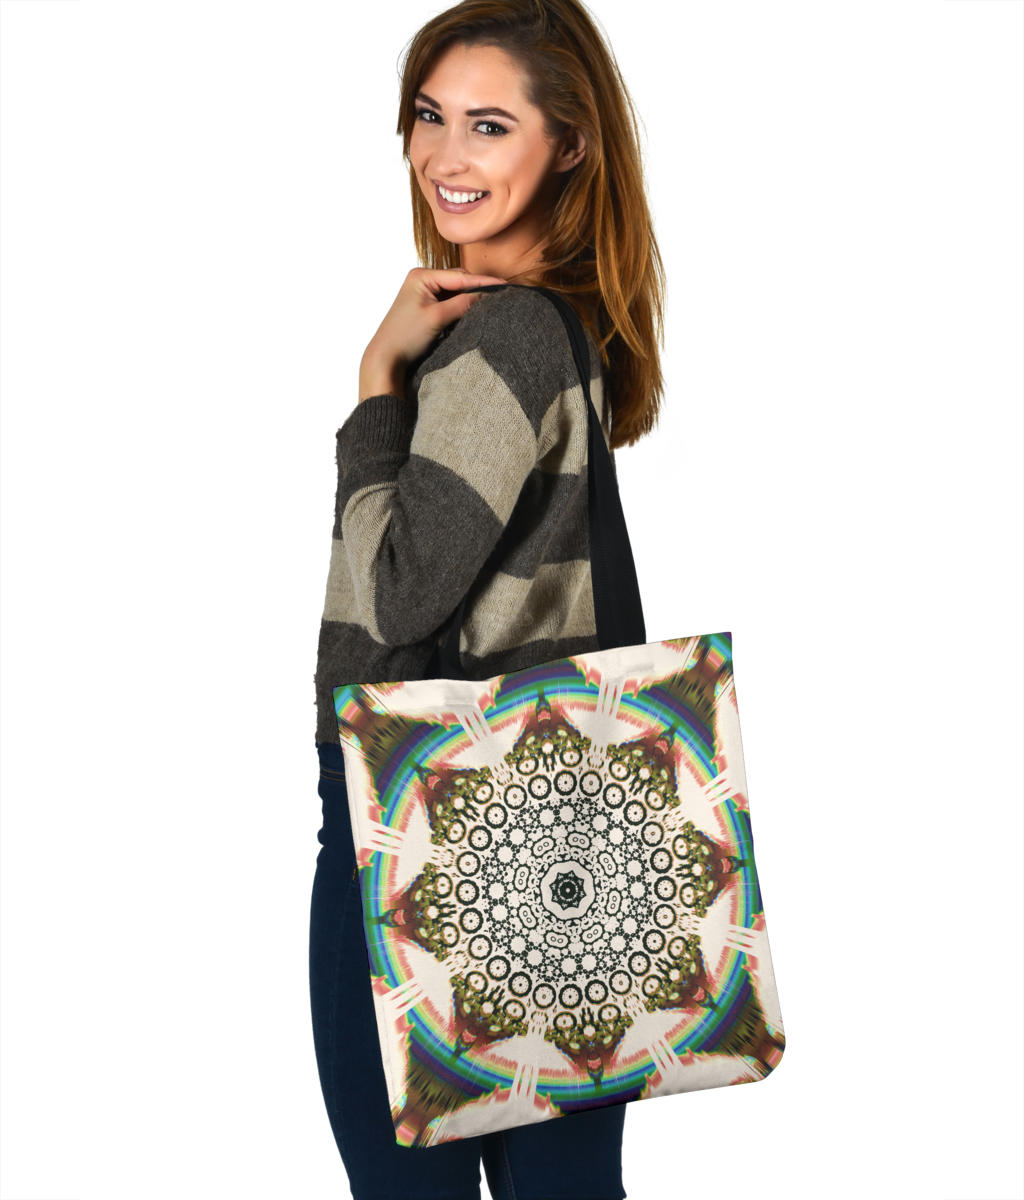 Variations on a Star: 9 | Tote Bag | Makroverset